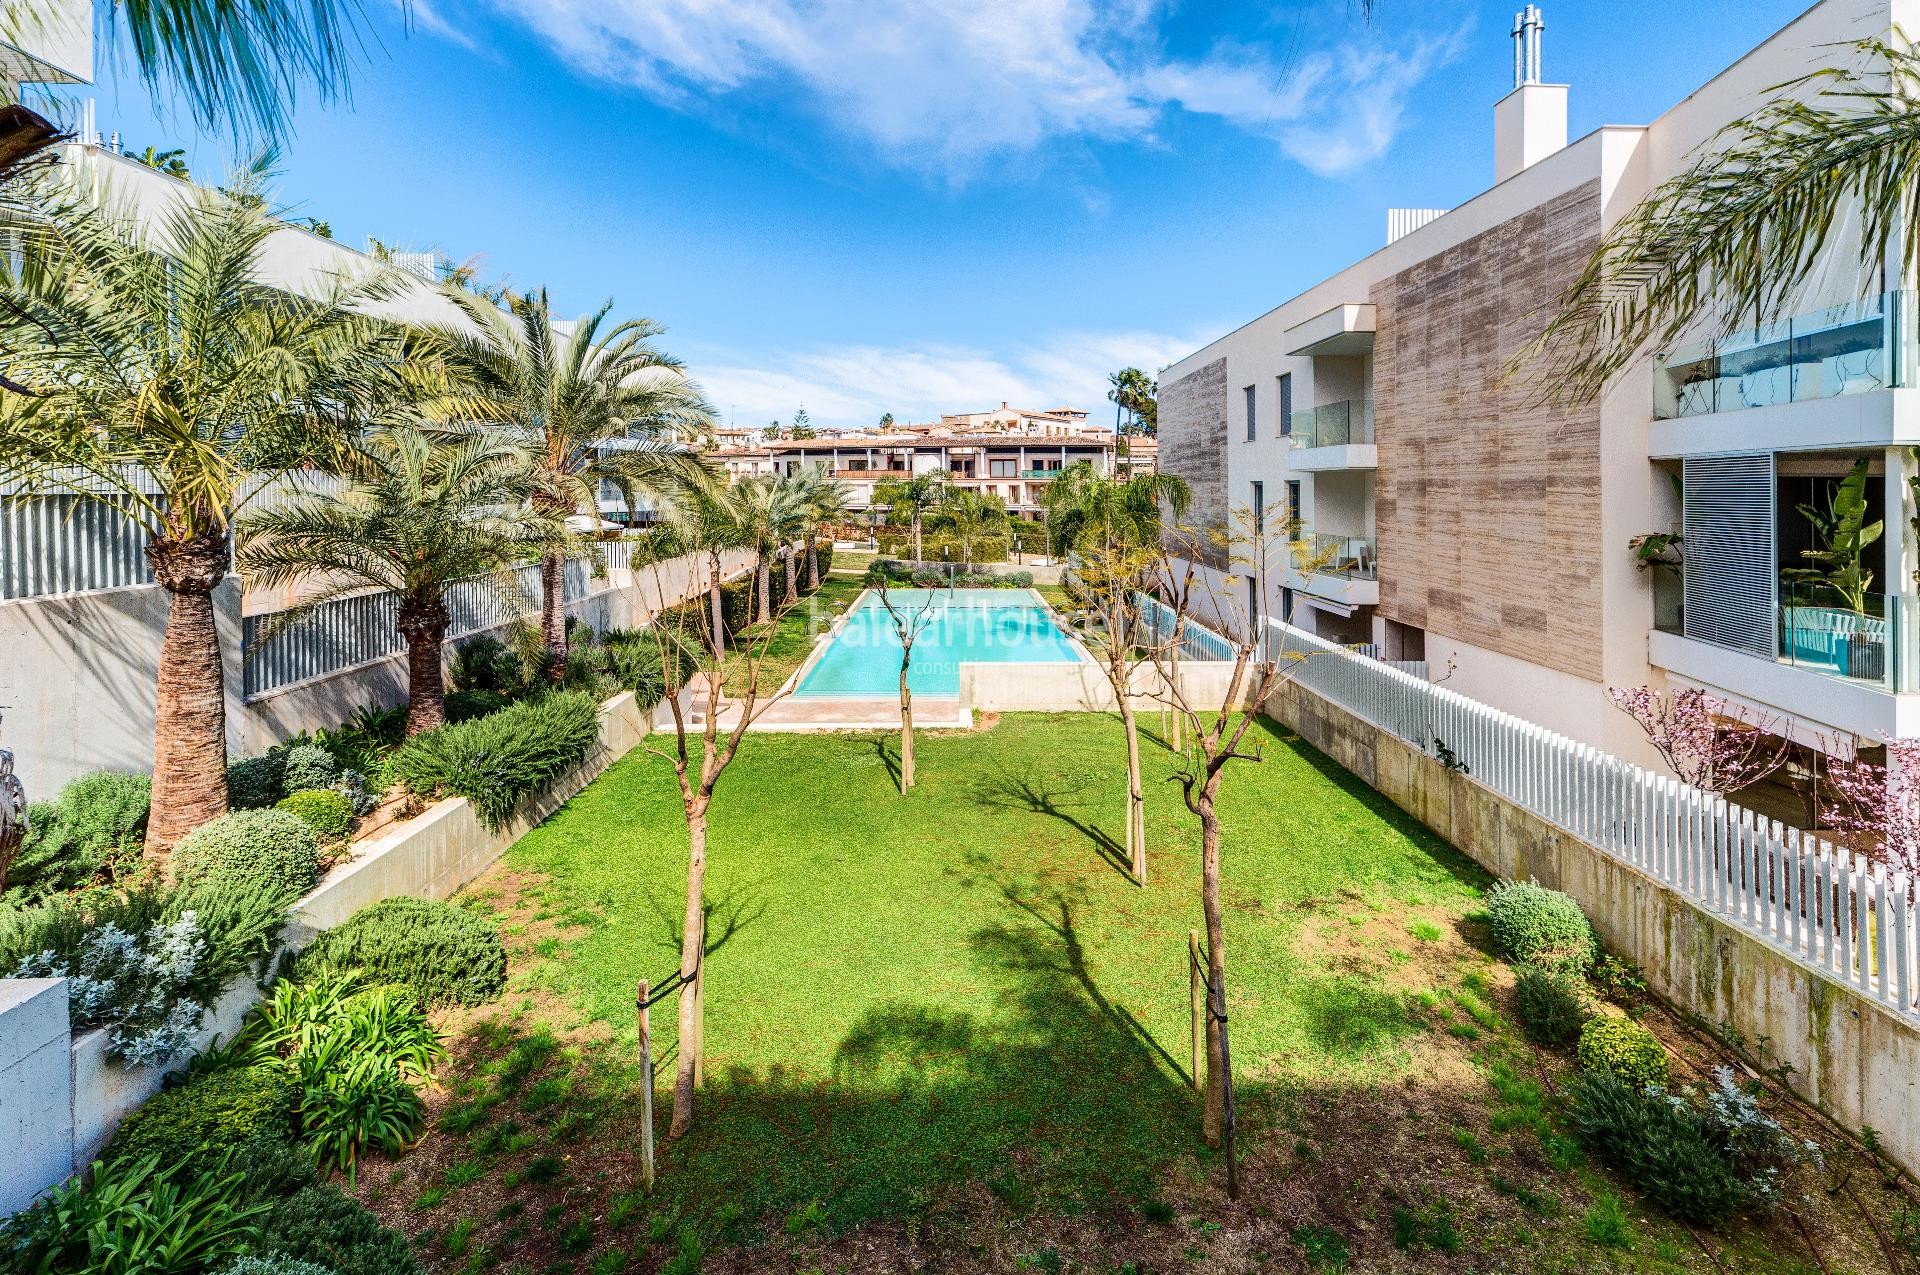 Fabulous penthouse with golf views, solarium and private pool in a well-kept complex in Palma